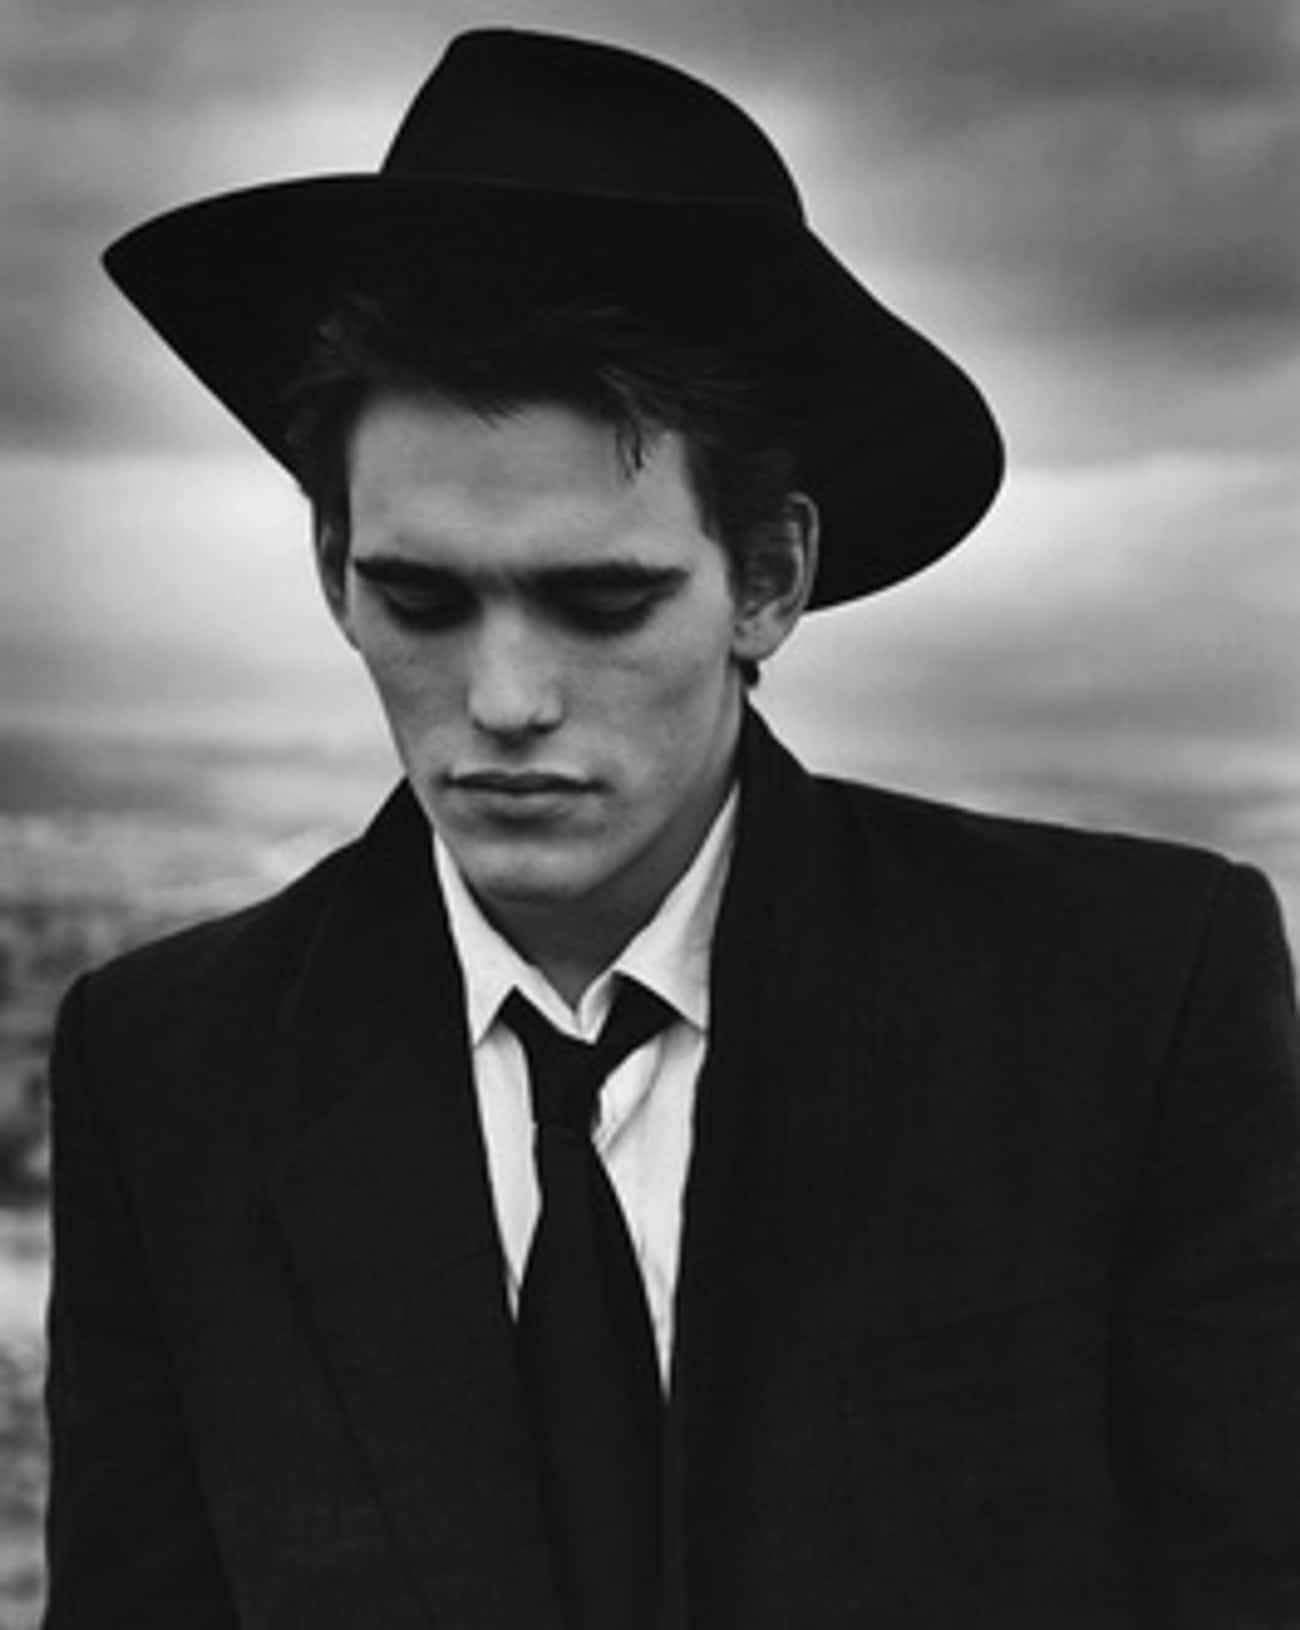 Young Matt Dillon in Suit and Tie with Black Hat